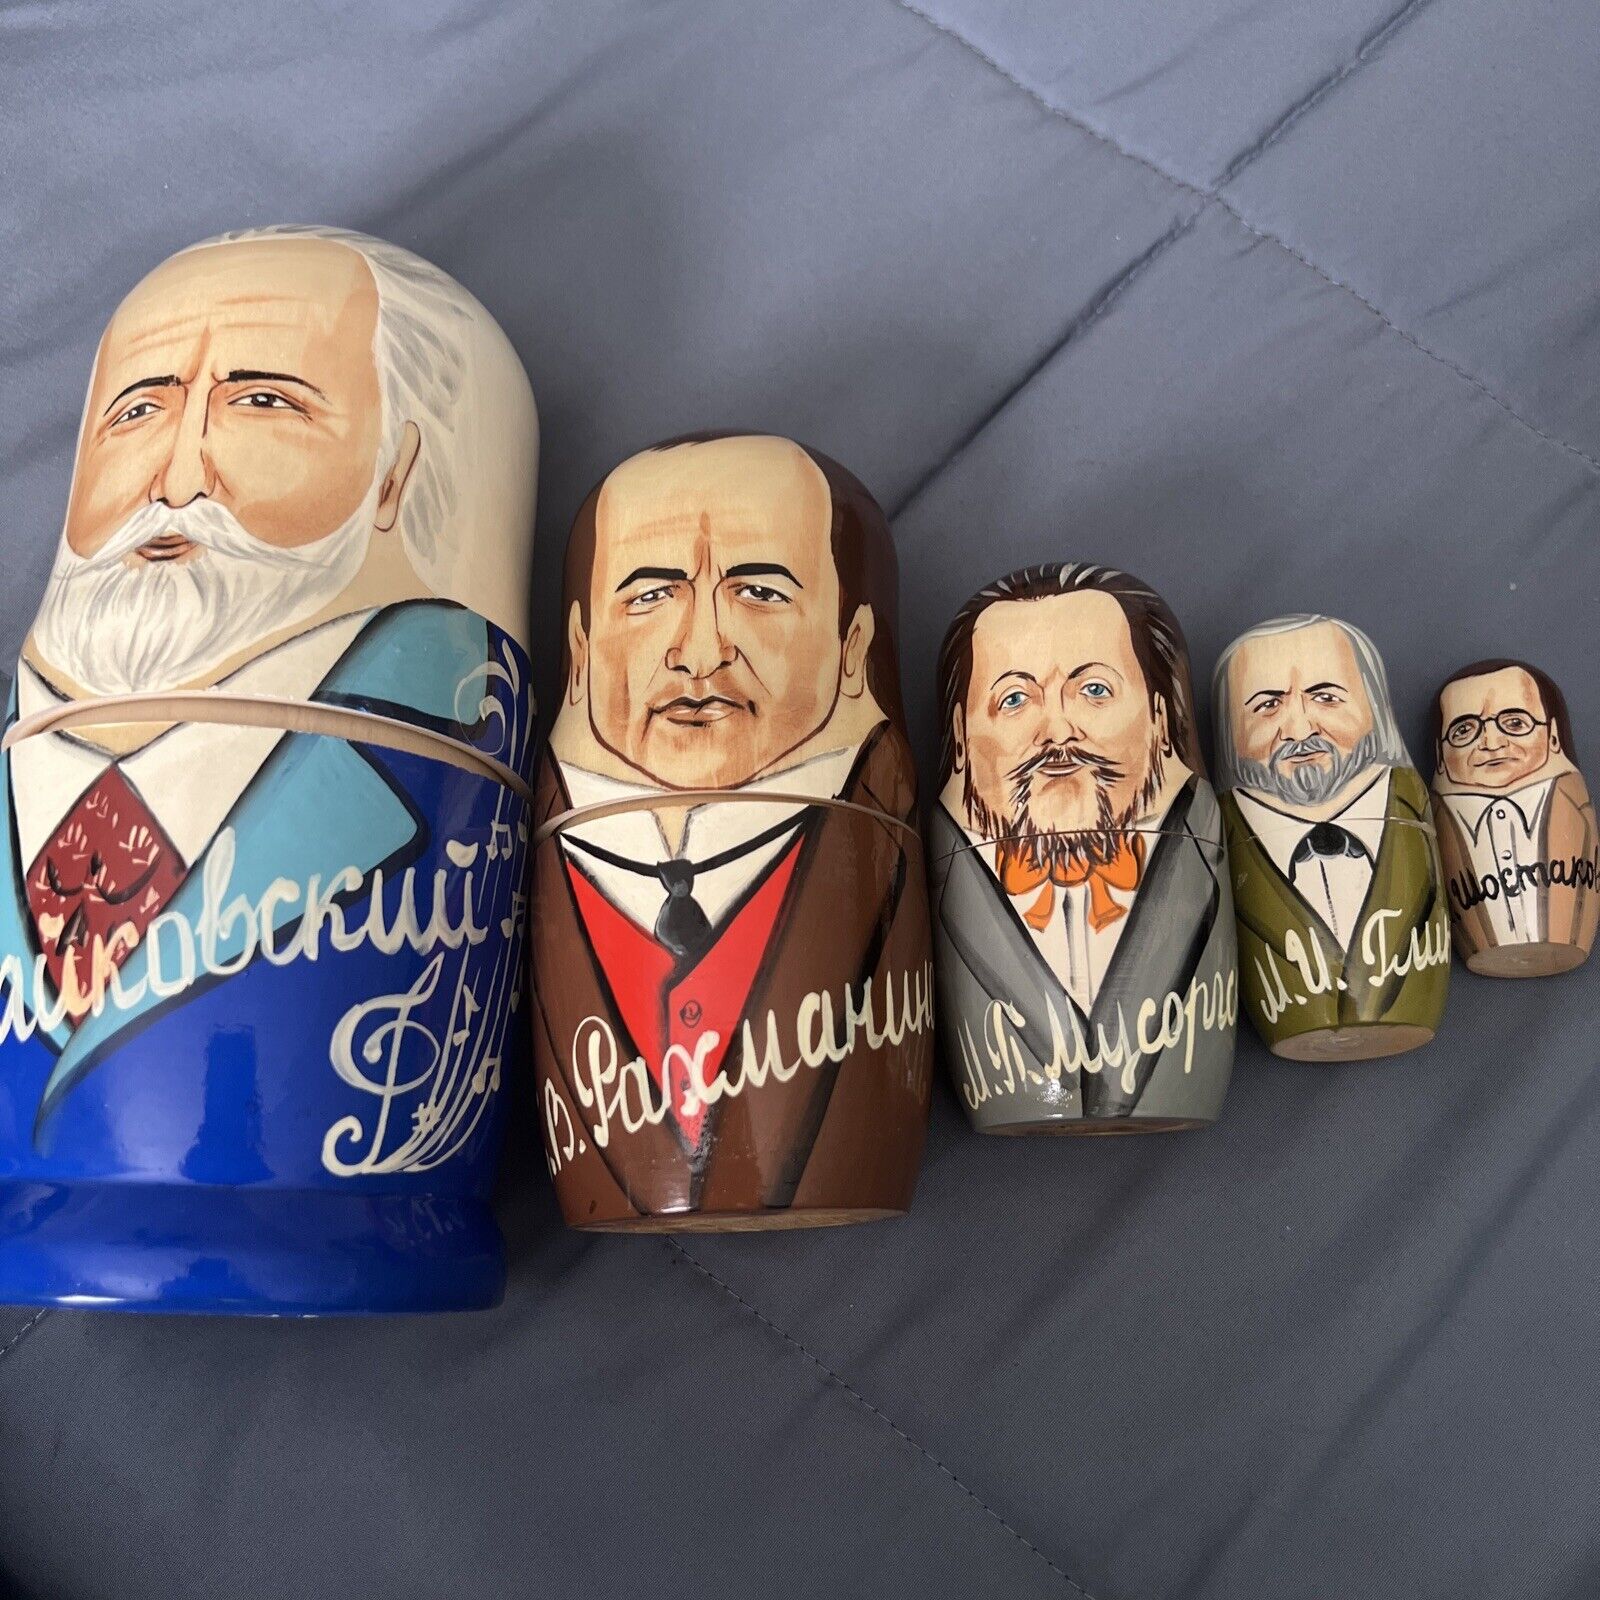 AUTHENTIC Russian Nesting Dolls - Tchaikovsky composers - 5 dolls - wooden